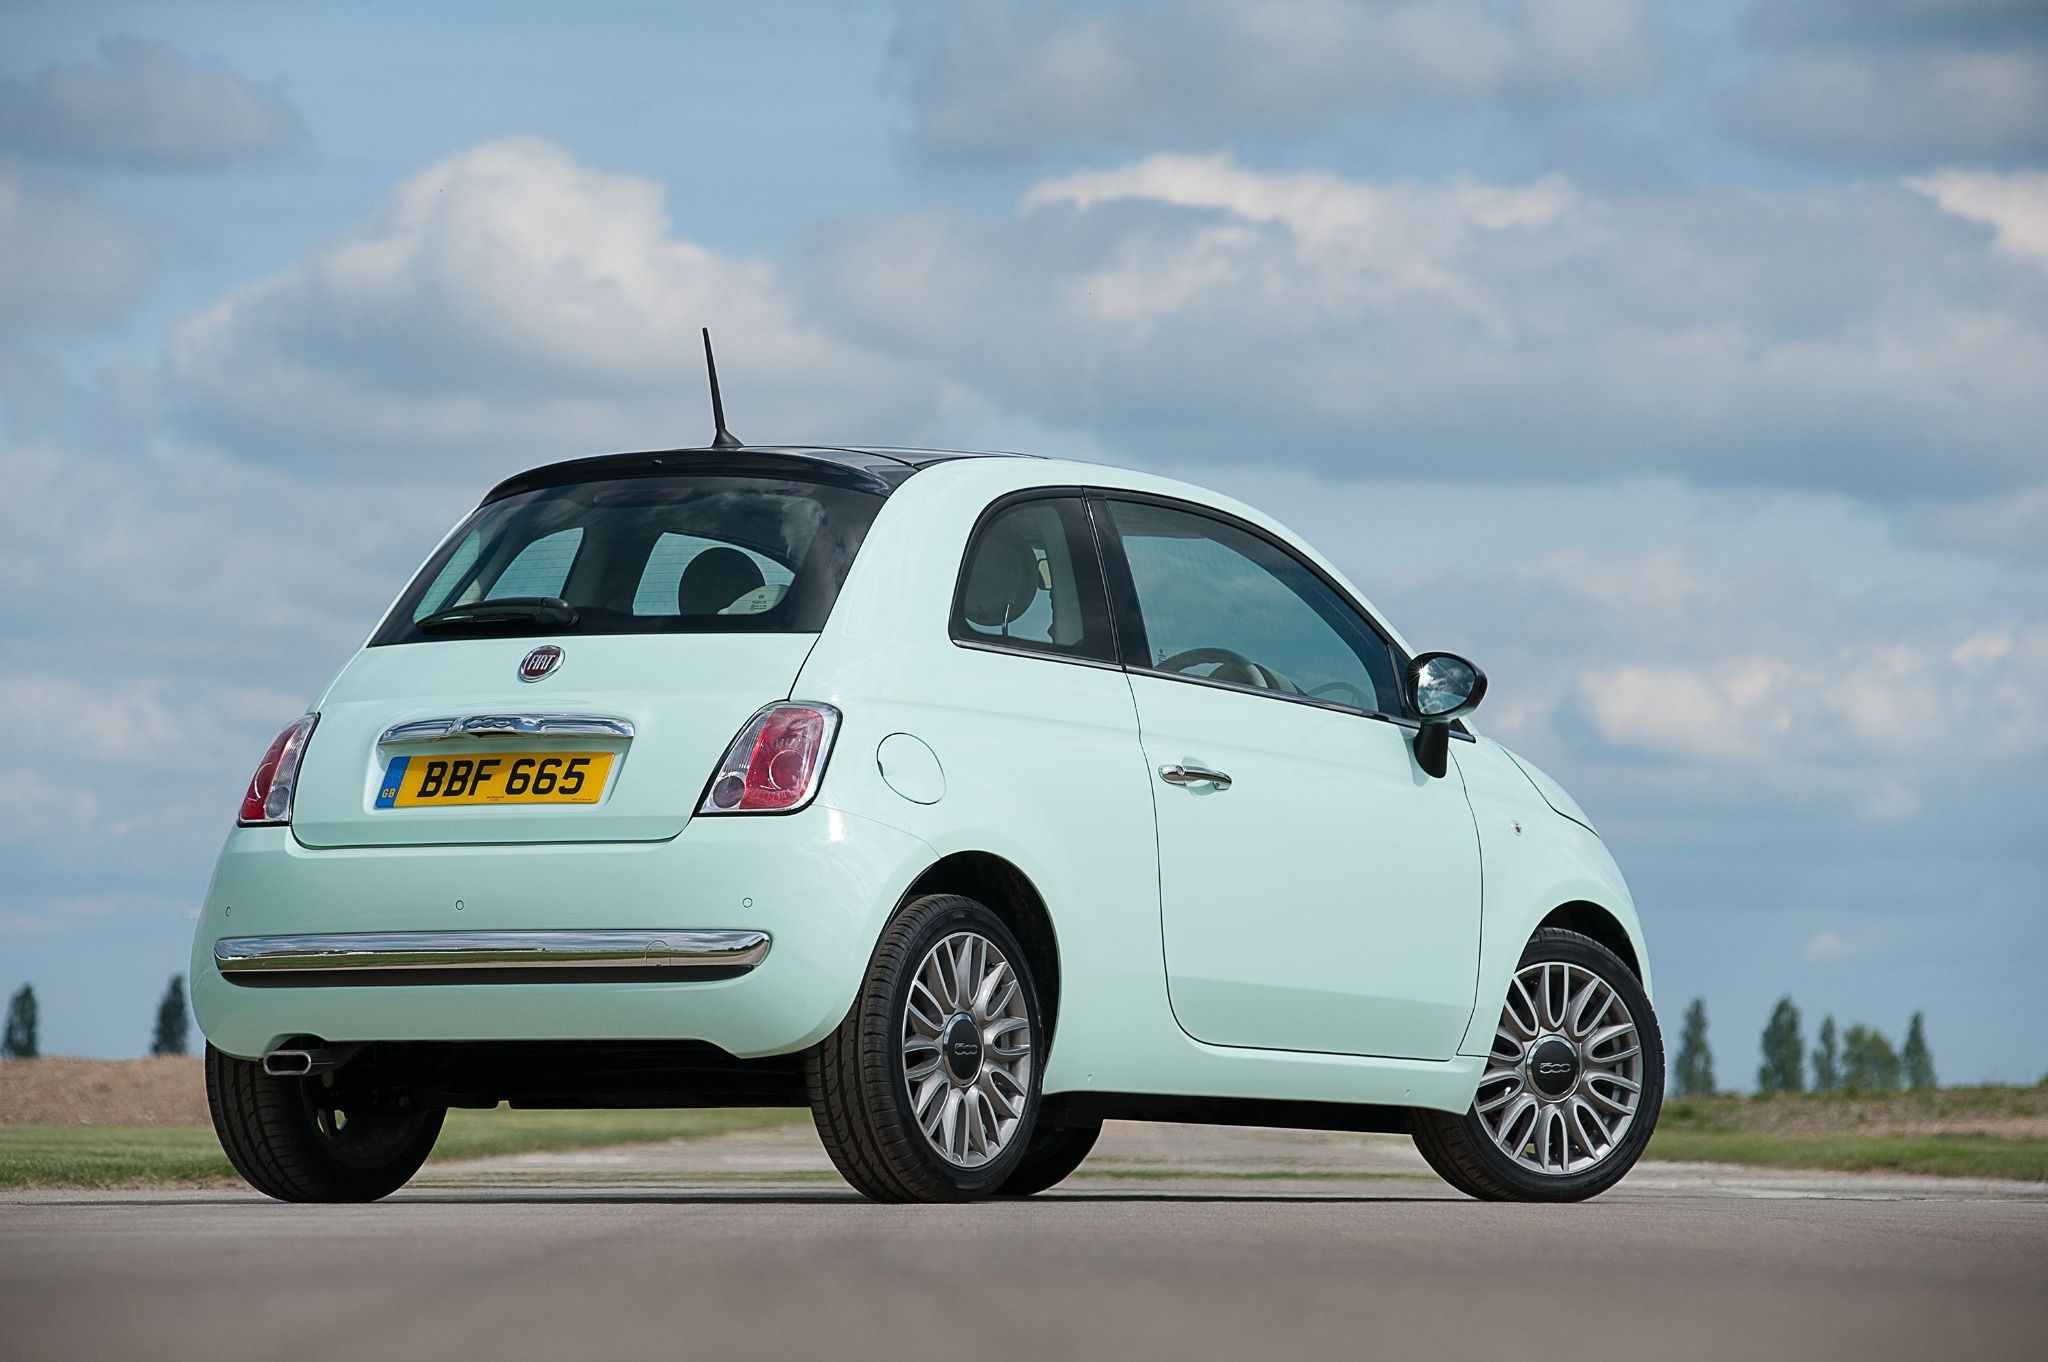 Light mint green fiat 500 parked on a road